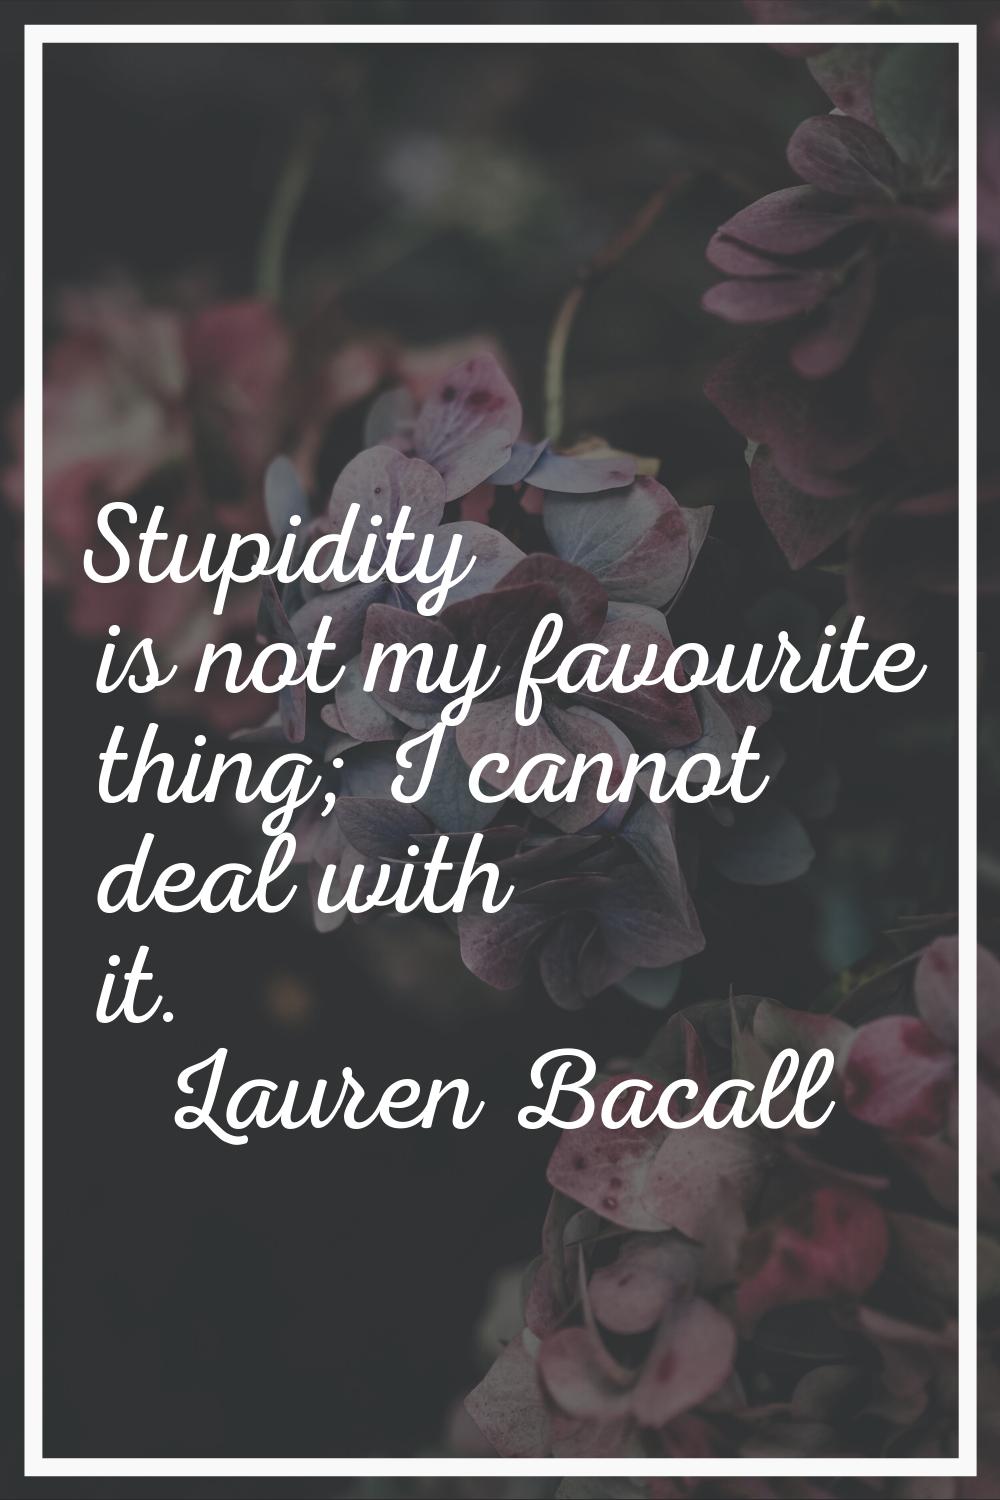 Stupidity is not my favourite thing; I cannot deal with it.